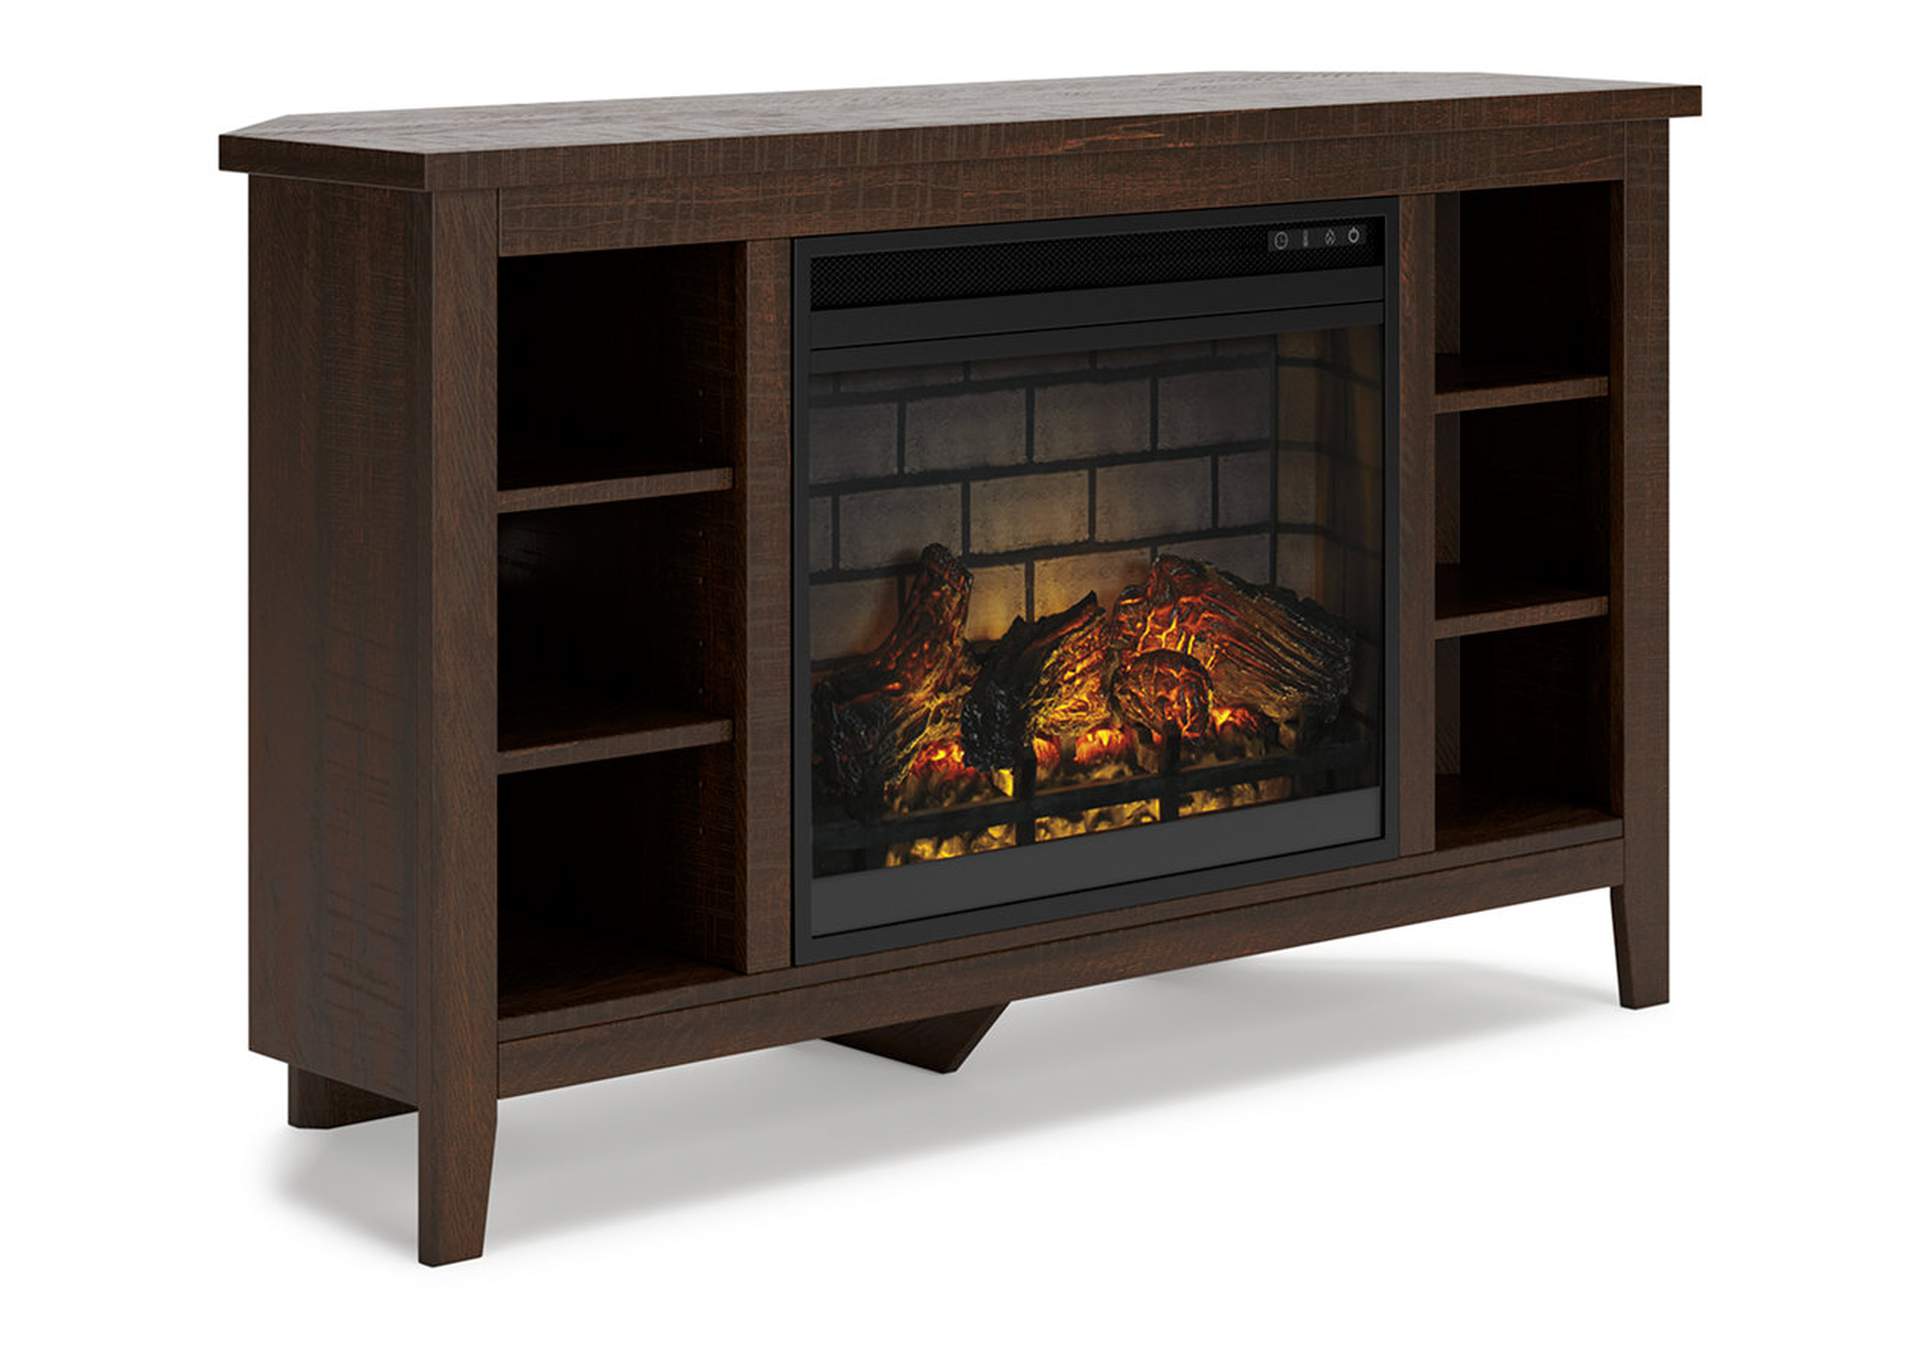 Camiburg Corner TV Stand with Electric Fireplace,Signature Design By Ashley